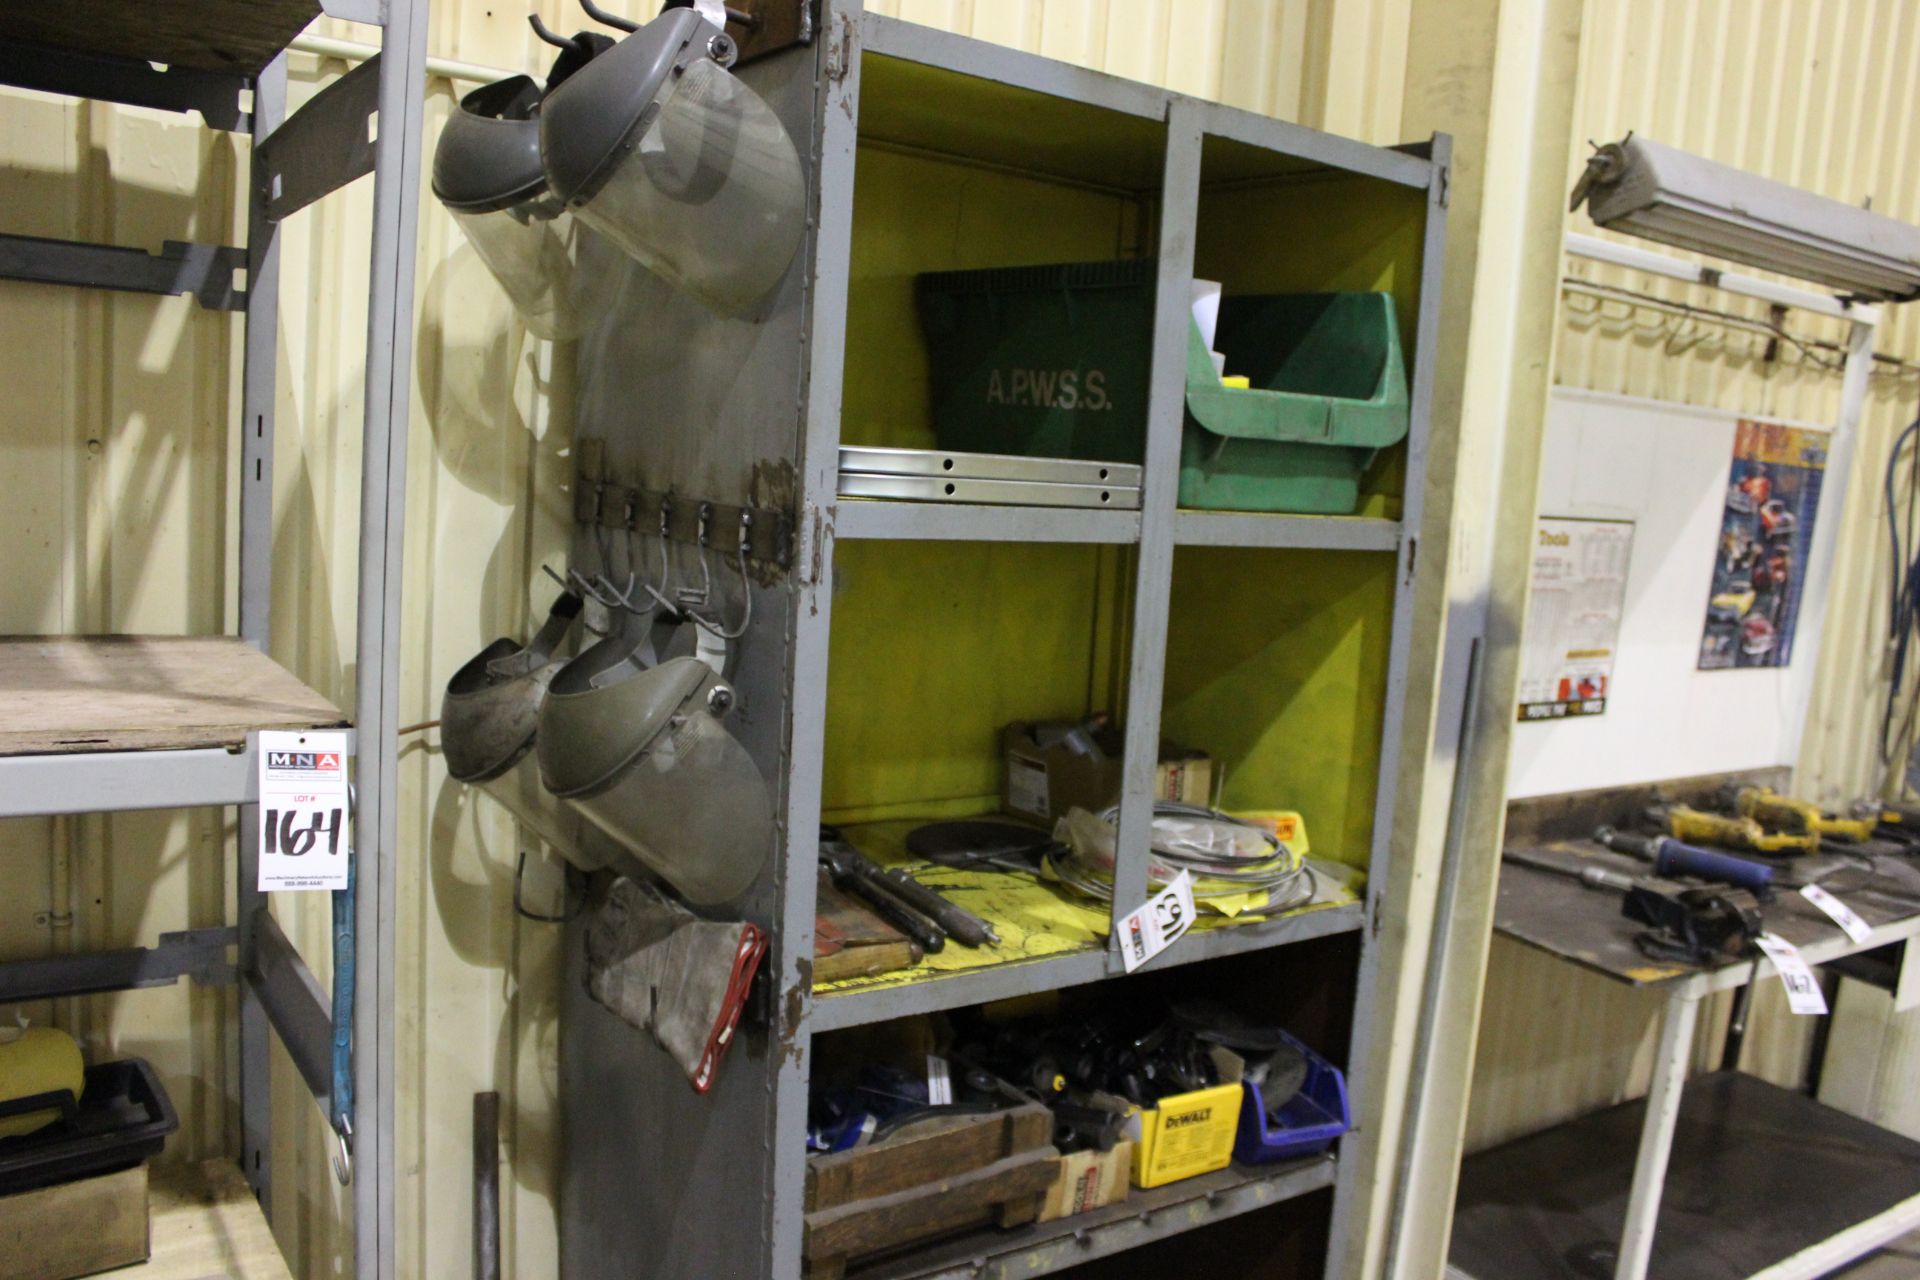 METAL SHELVING UNIT, ASSORTED GRINDER PARTS, DISCS, AND FACE SHIELDS - Image 5 of 5